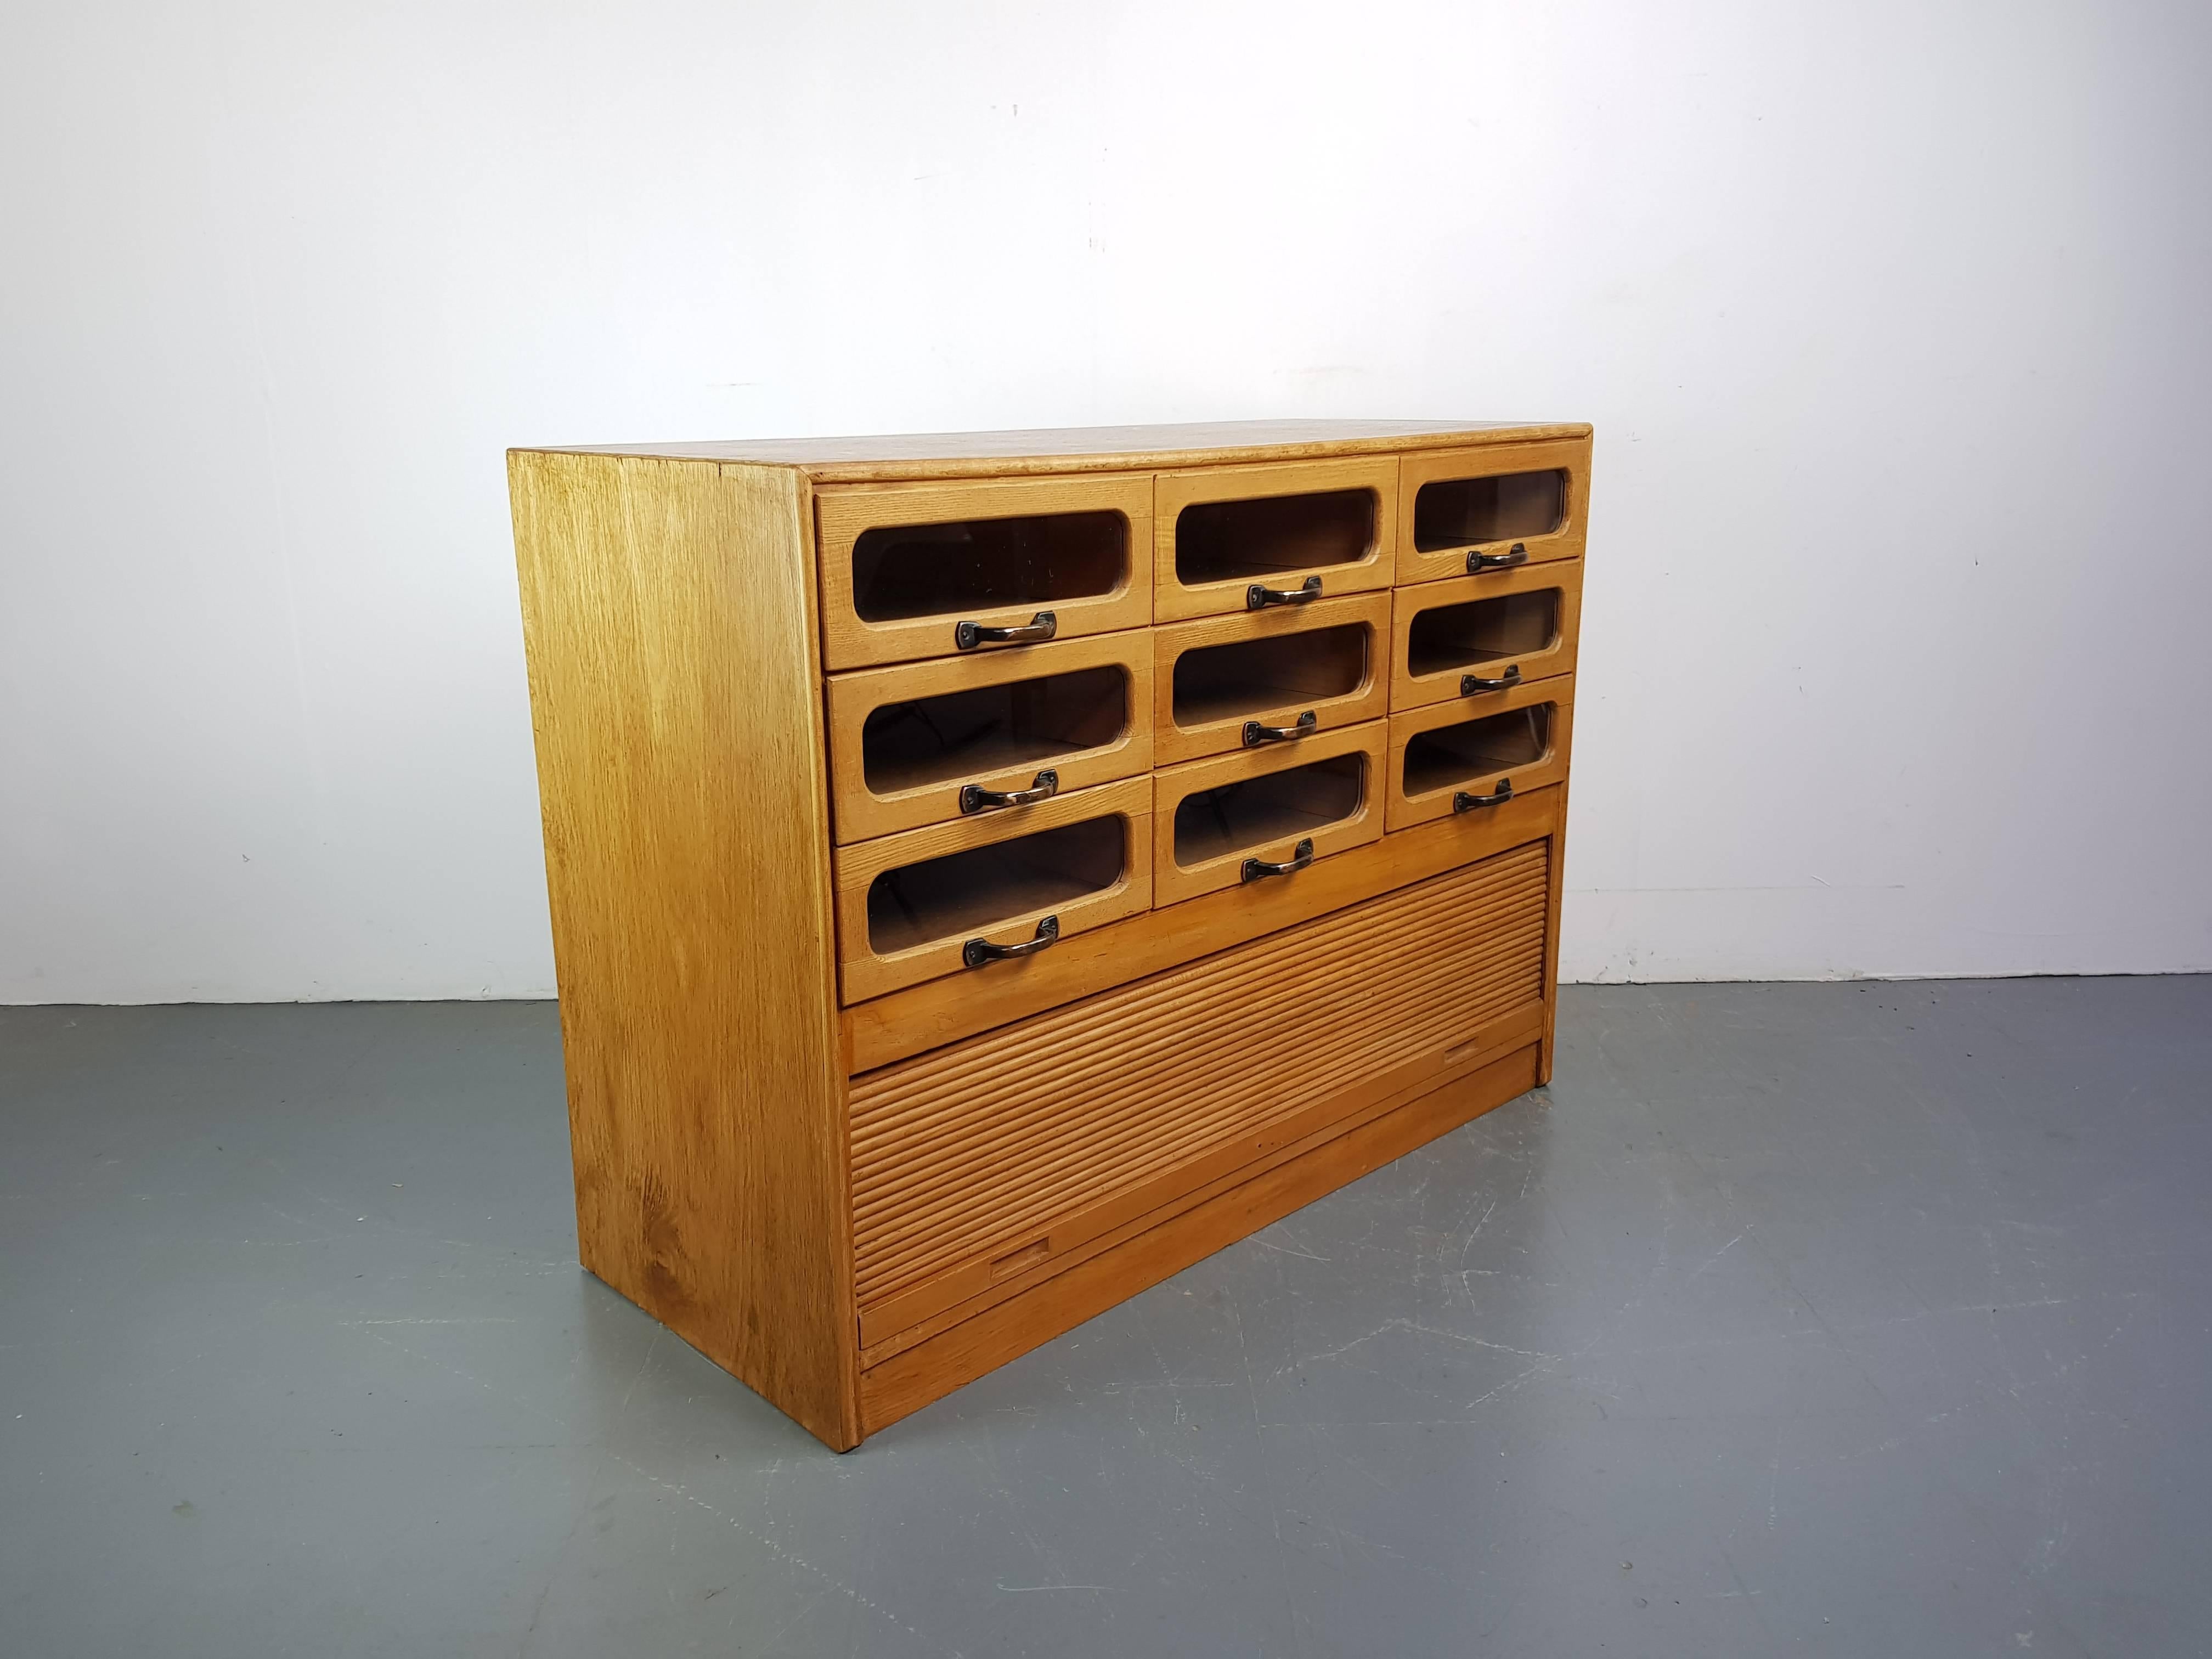 Lovely nine drawer haberdashery shop cabinet from the first half of the last century.

It has nine glass fronted drawers, all with metal “D” handles and a base compartment with roll down front.

Approximate dimensions:

Height 89cm

Width